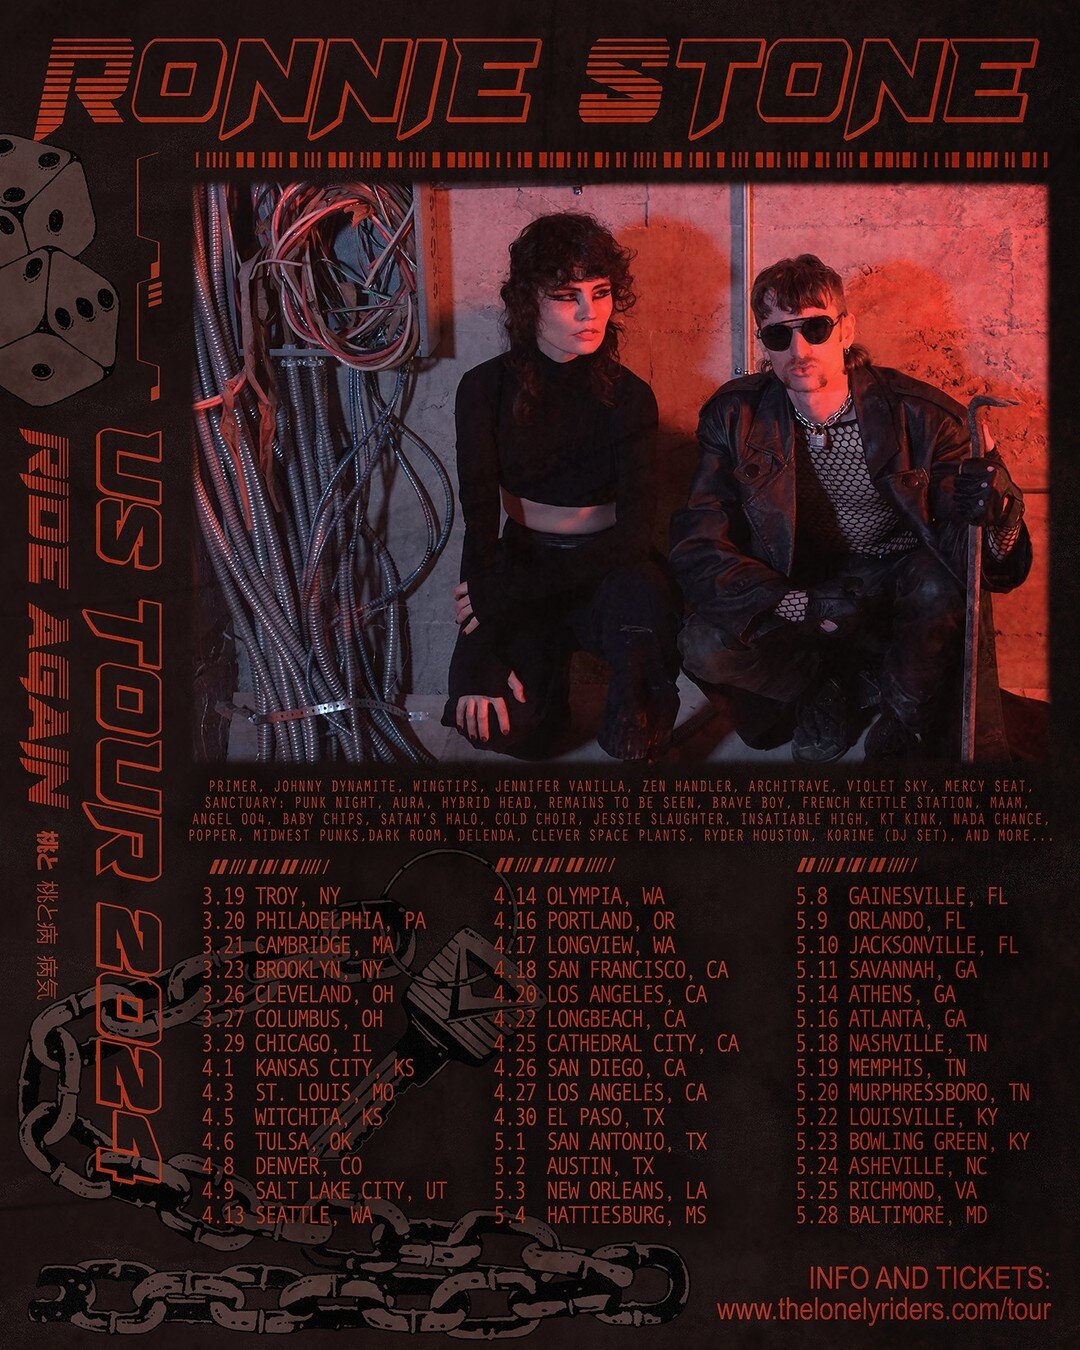 ⛓️RIDE AGAIN SPRING TOUR &lsquo;24⛓️

We&rsquo;re doing it big this time, coming thru to your town whether it&rsquo;s a venue, punk house, or art gallery we plan to rip shit up coast 2 coast! Thanks to @between_booking making this possible! You can f